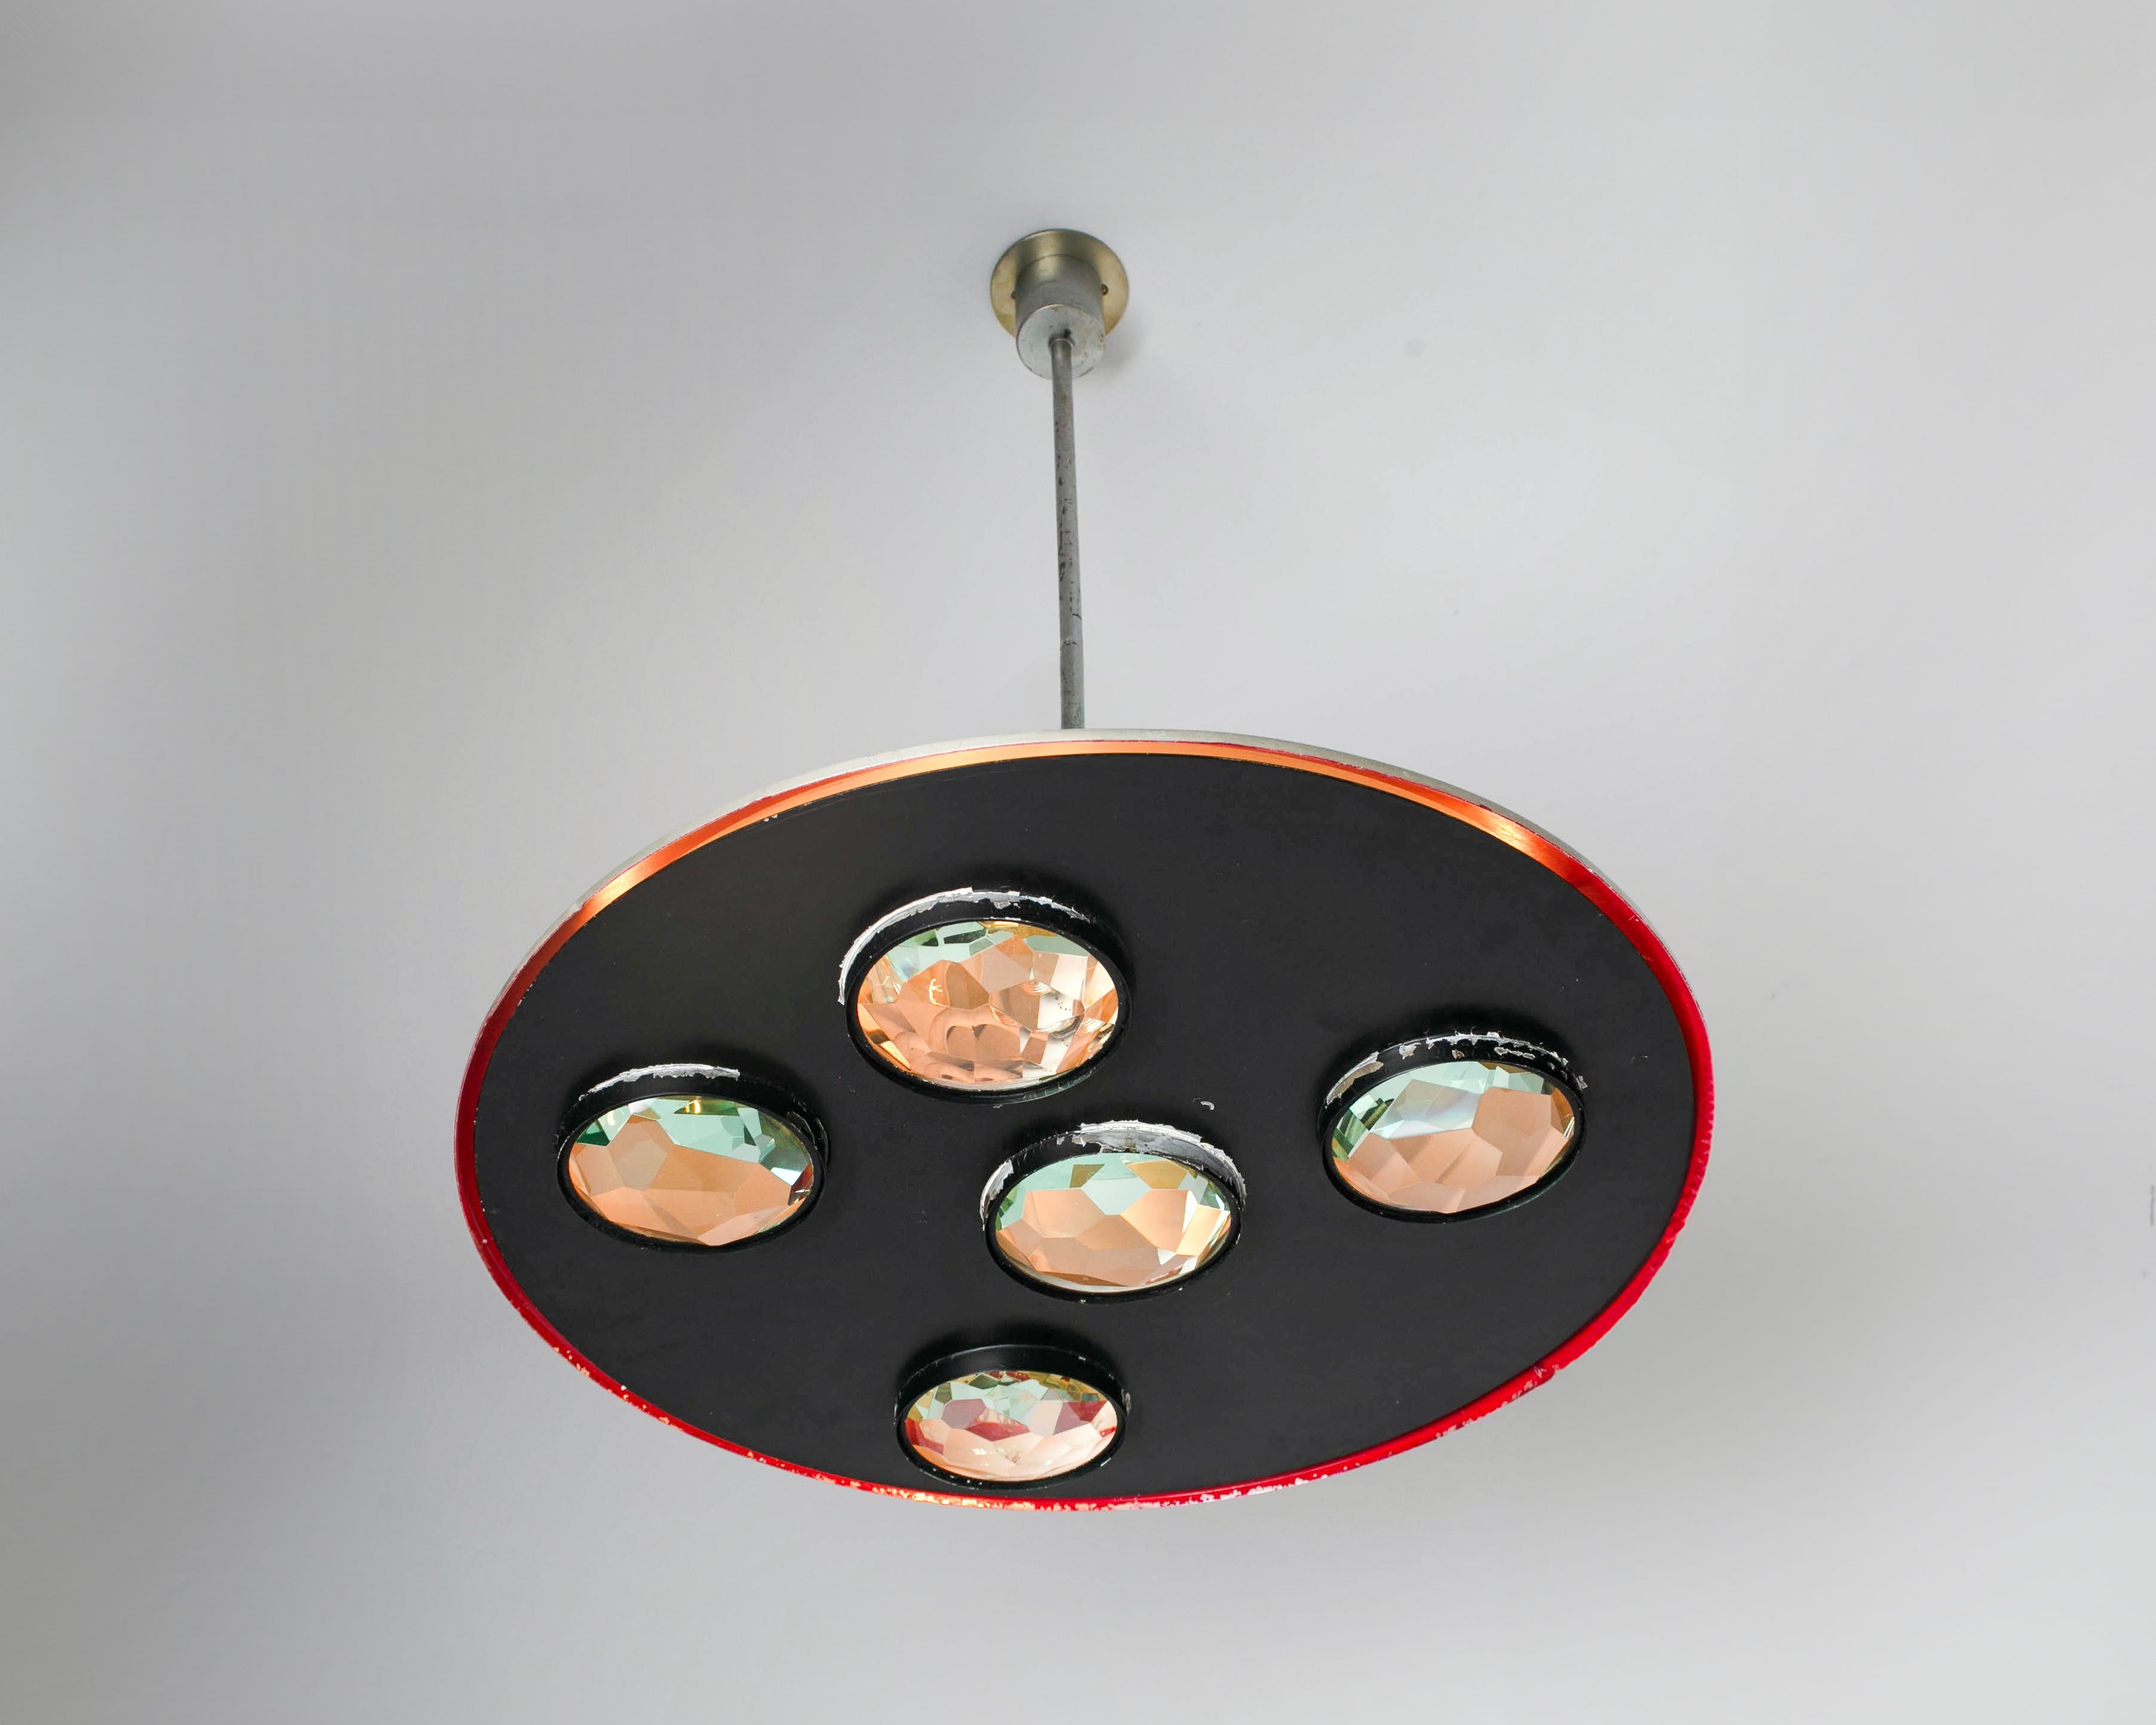 Model 2132 Ceiling Light by Max Ingrand for Fontana Arte. Designed and manufactured in Italy, 1962. Large saucer style pendant with a steel and aluminum body, holding five individual cut outs, housing five Fontana Arte teal glass gems. The finish of